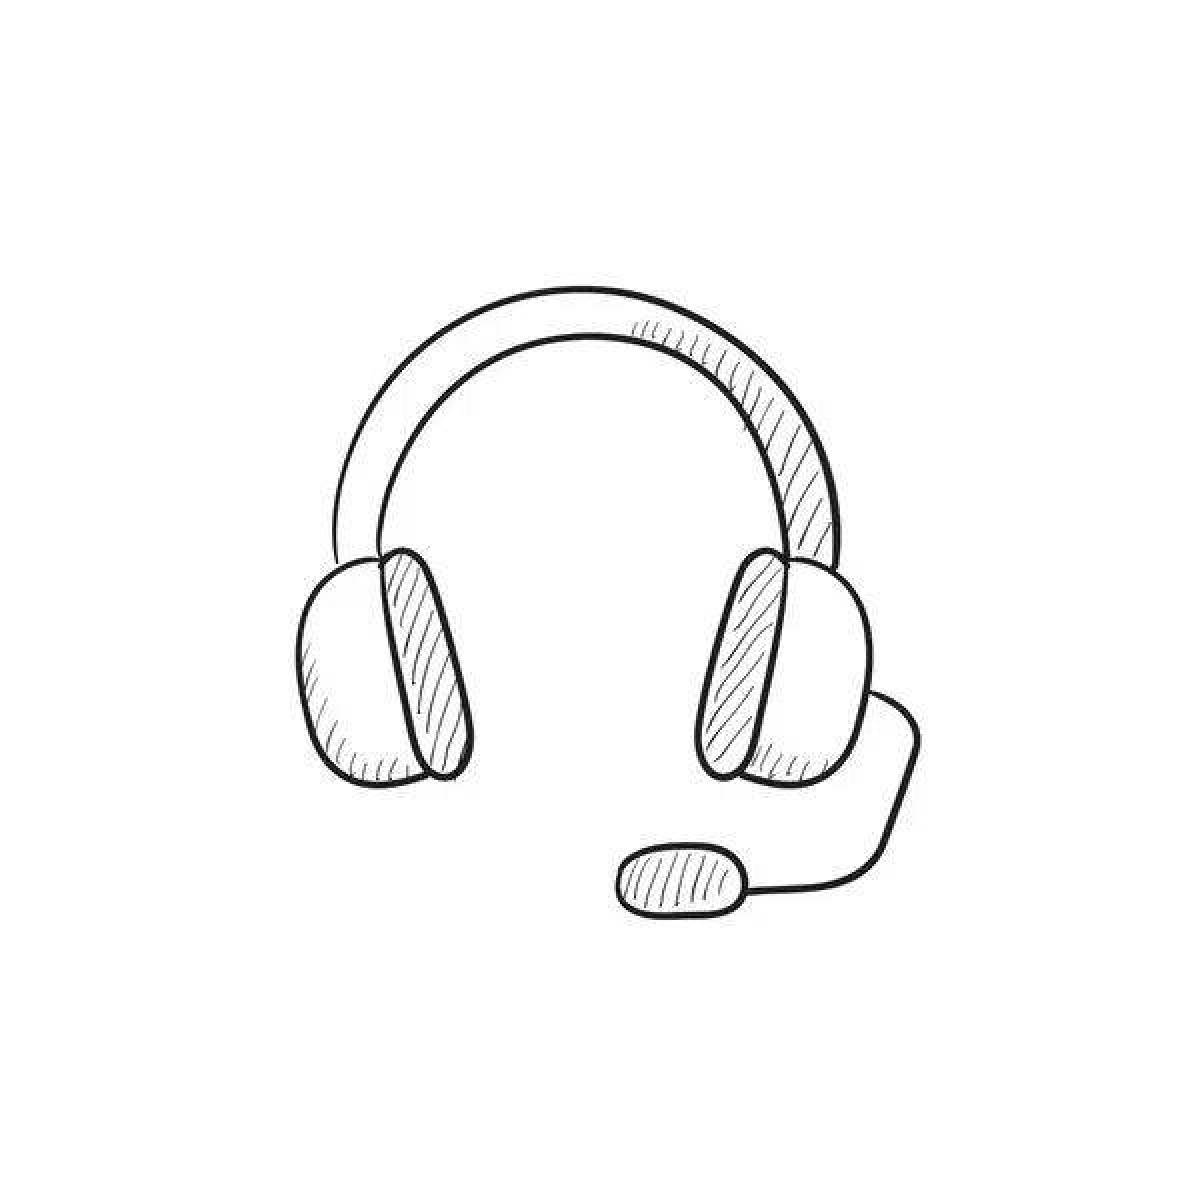 Coloring page attractive wireless headphones